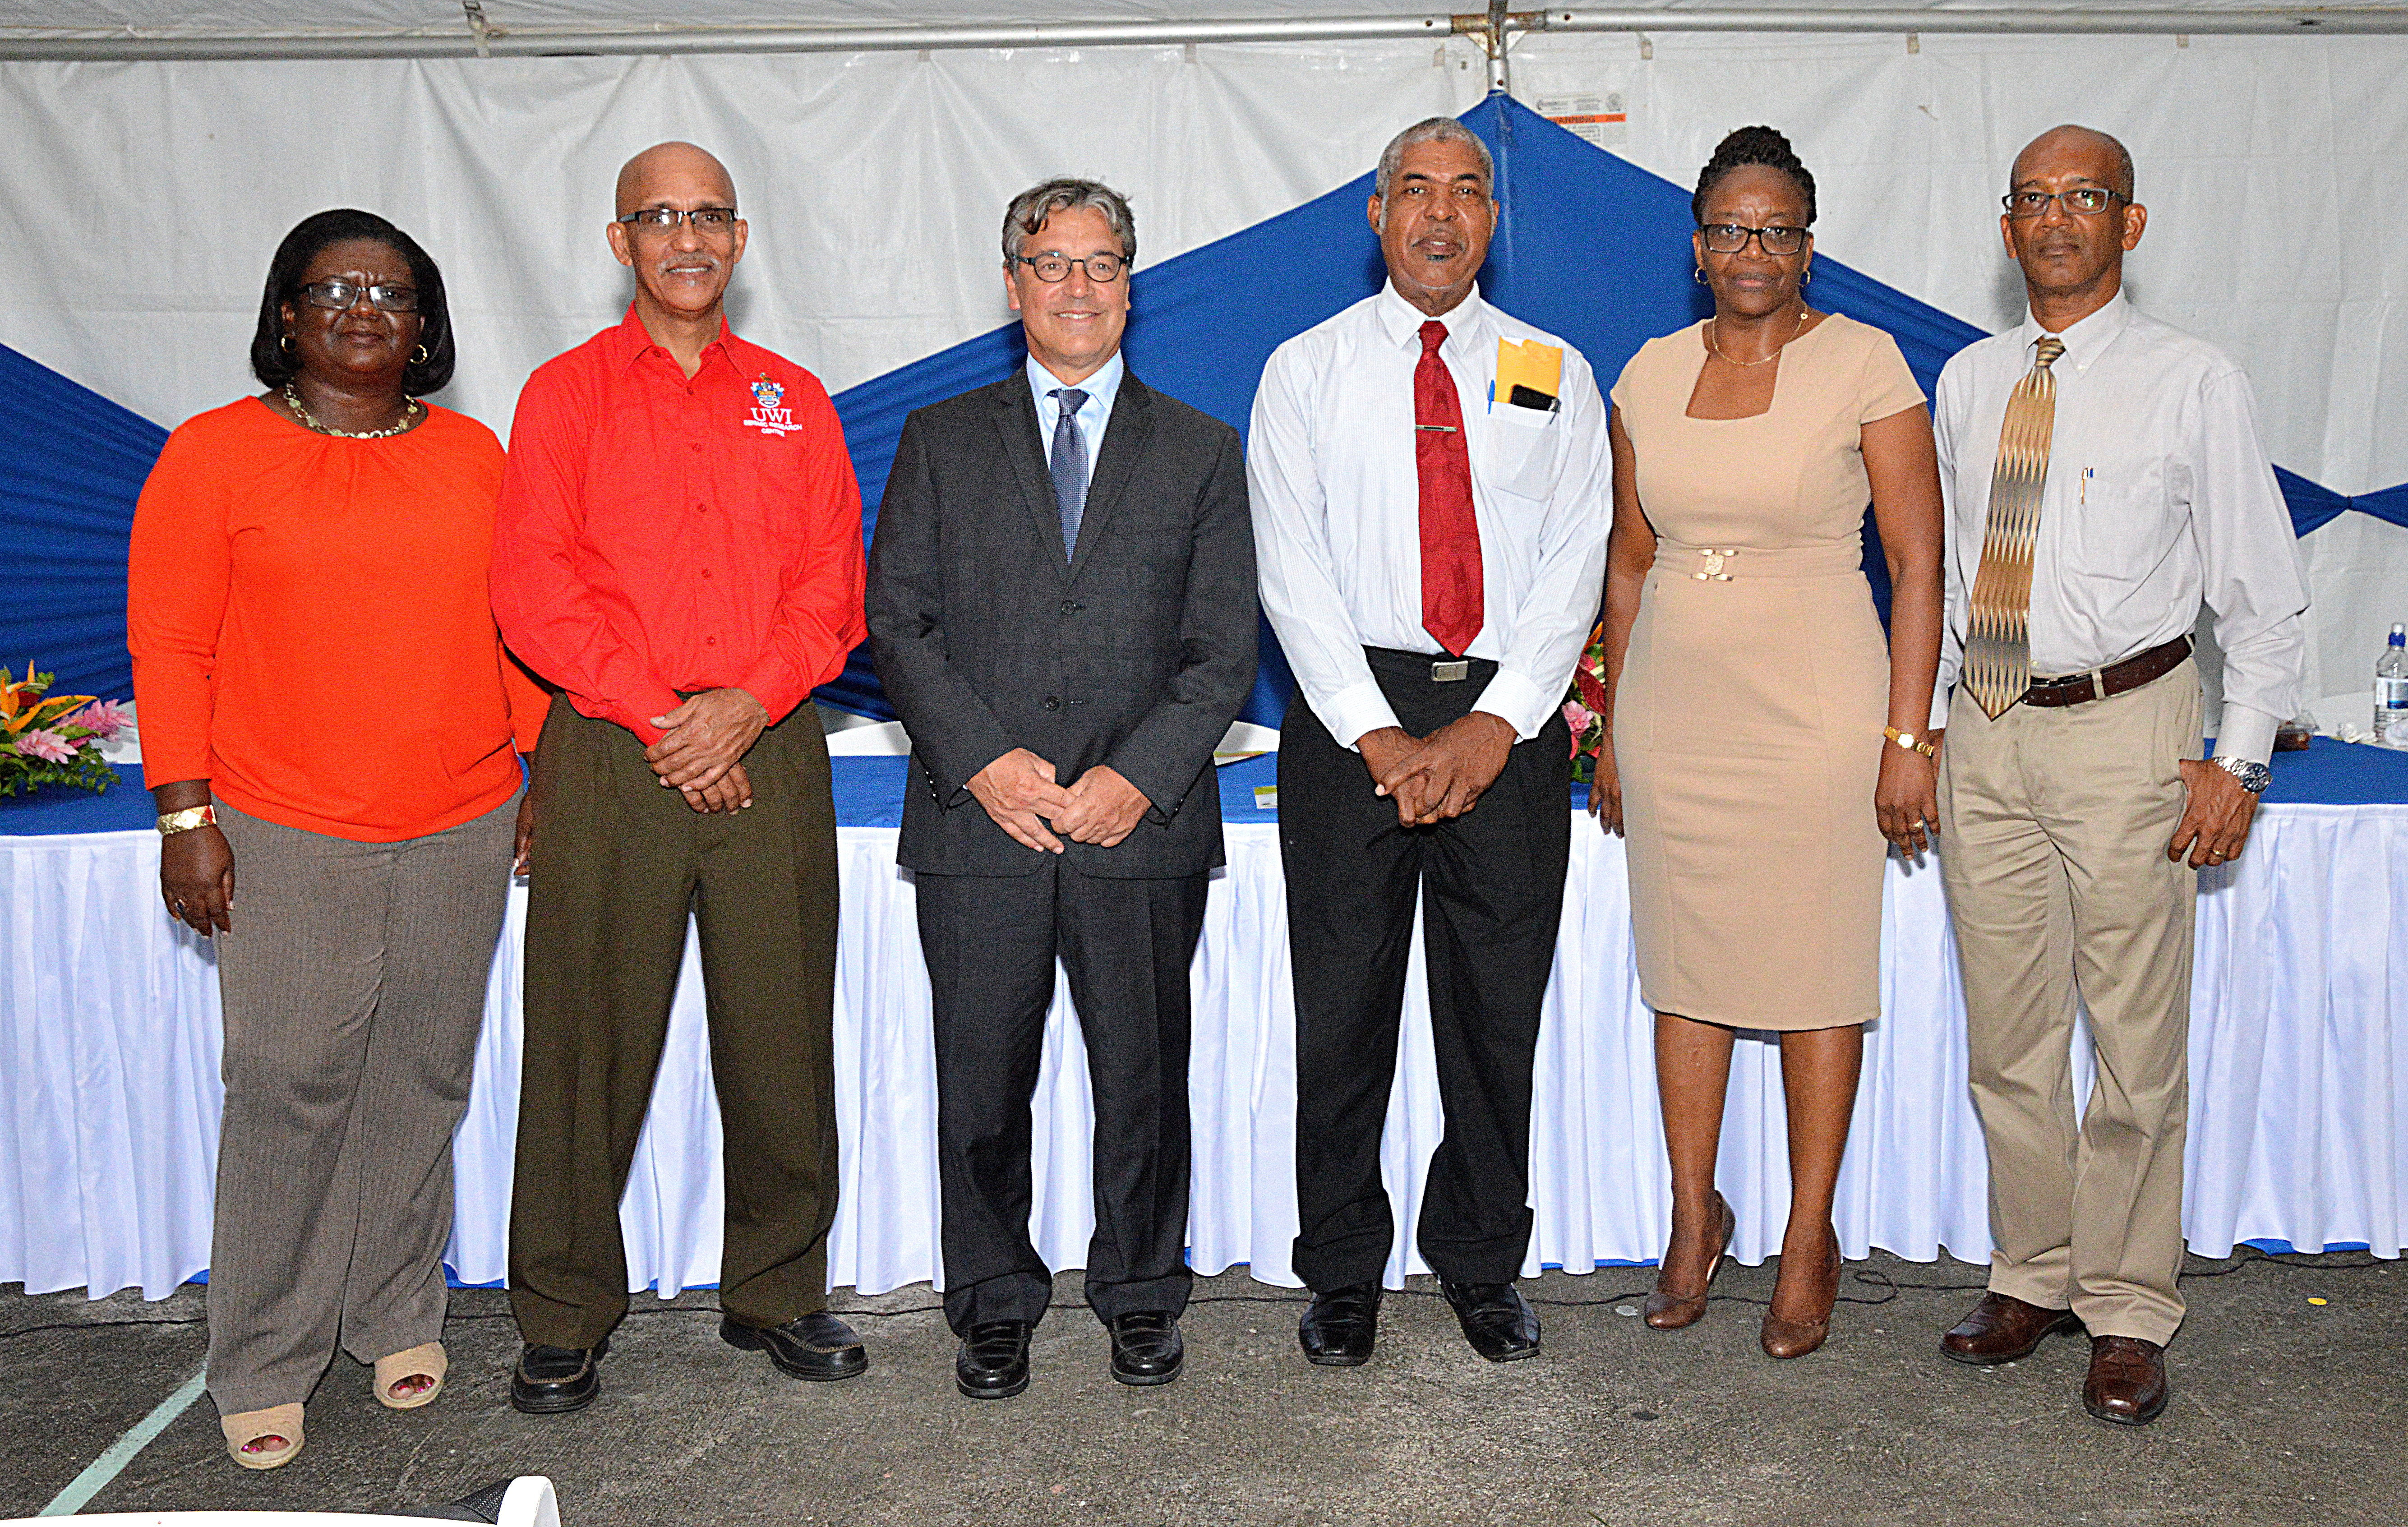 Officials at the launch of the “Volcano-Ready Communities in St. Vincent and the Grenadines” project held at the Sandy Bay Government School on April 6, 2018. (L-R) Michelle Forbes, Director, National Emergency Management Organisation (NEMO); Dr. Richard Robertson, Director, UWI-SRC; Benôit-Pierre Laramée, Senior Director, Caribbean Regional Programme, High Commission of Canada and Canada’s Director to CDB; Hon. Montgomery Daniel, Minister of Housing, Informal Human Settlements, Land and Surveys and Physical Planning; Permanent Secretary Nerissa McMillan, Ministry of National Mobilisation, Social Development, Family, Gender Affairs, Persons with Disability and Youth; and Permanent Secretary Godfred Pompey, Ministry of National Security, Air and Seaport Development.